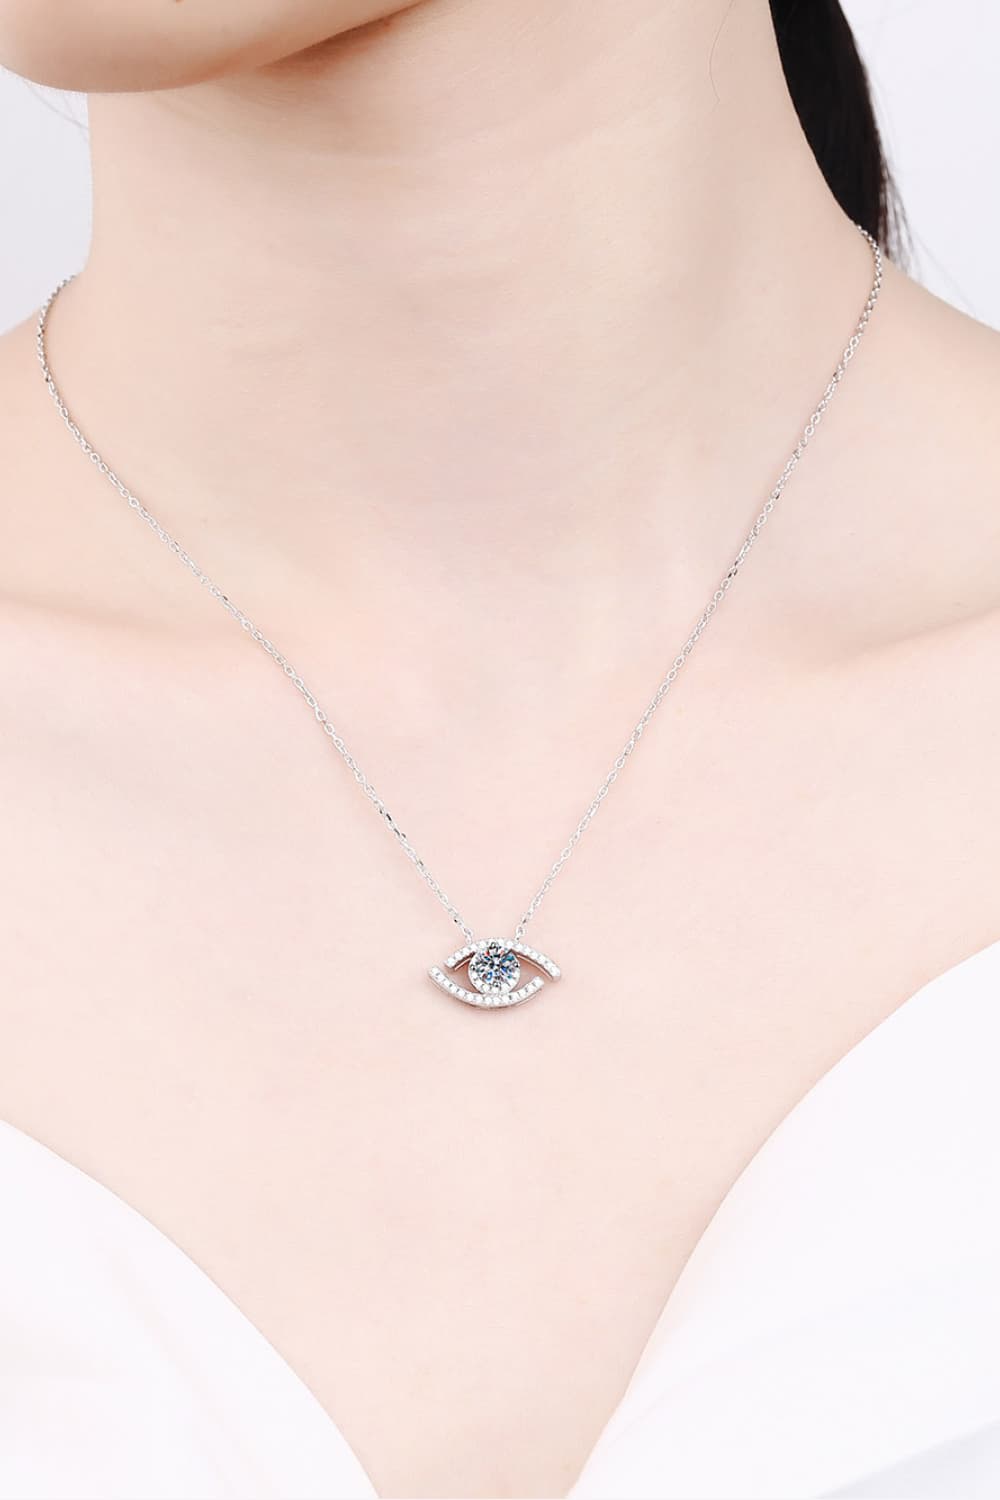 Blue Evil Eye Pendant Chain Necklace. 925 Sterling Silver.gold